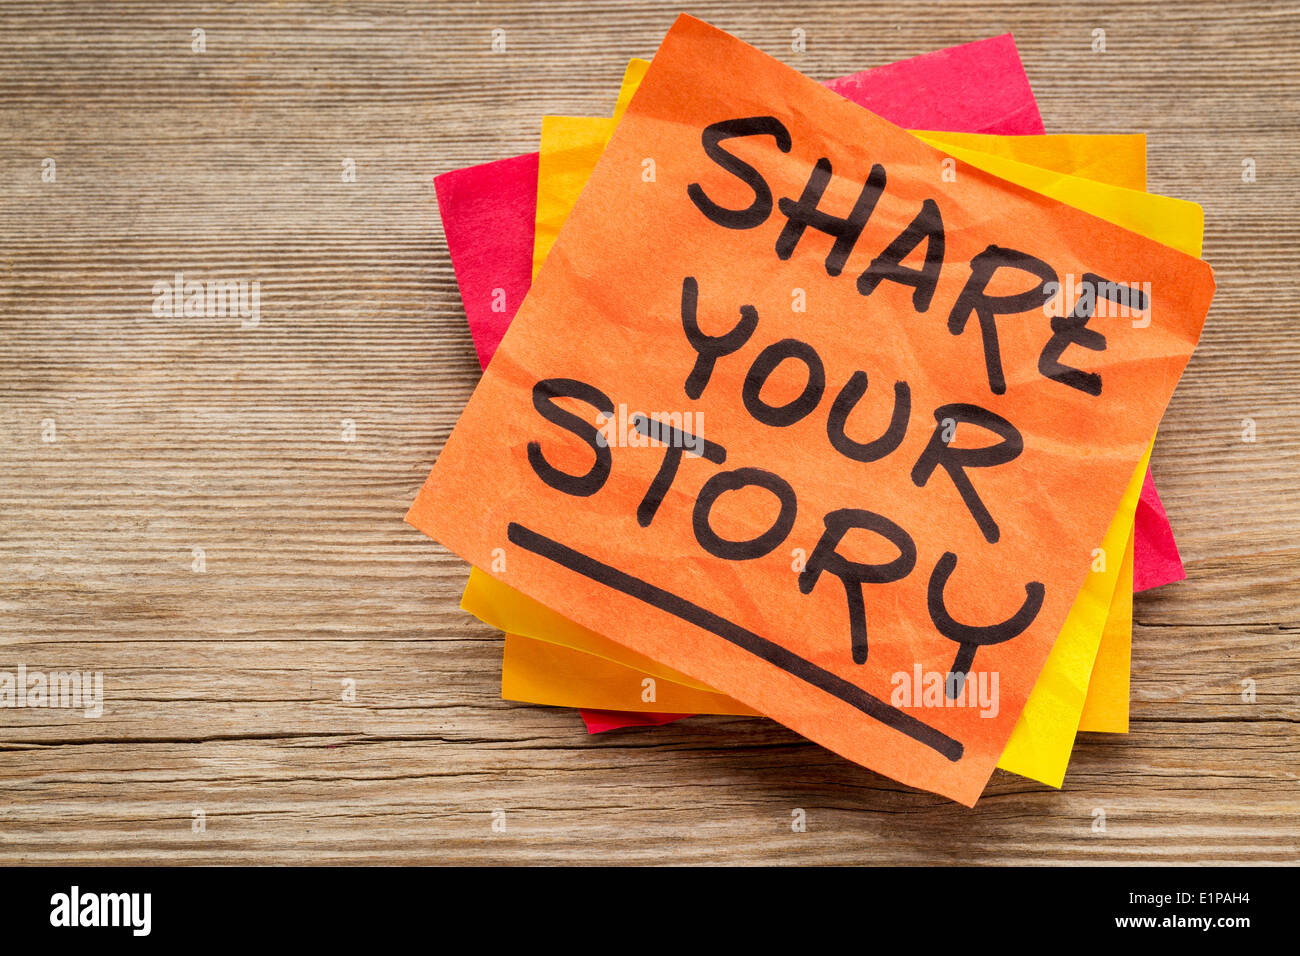 share your story suggestion on a sticky note against grained wood Stock Photo